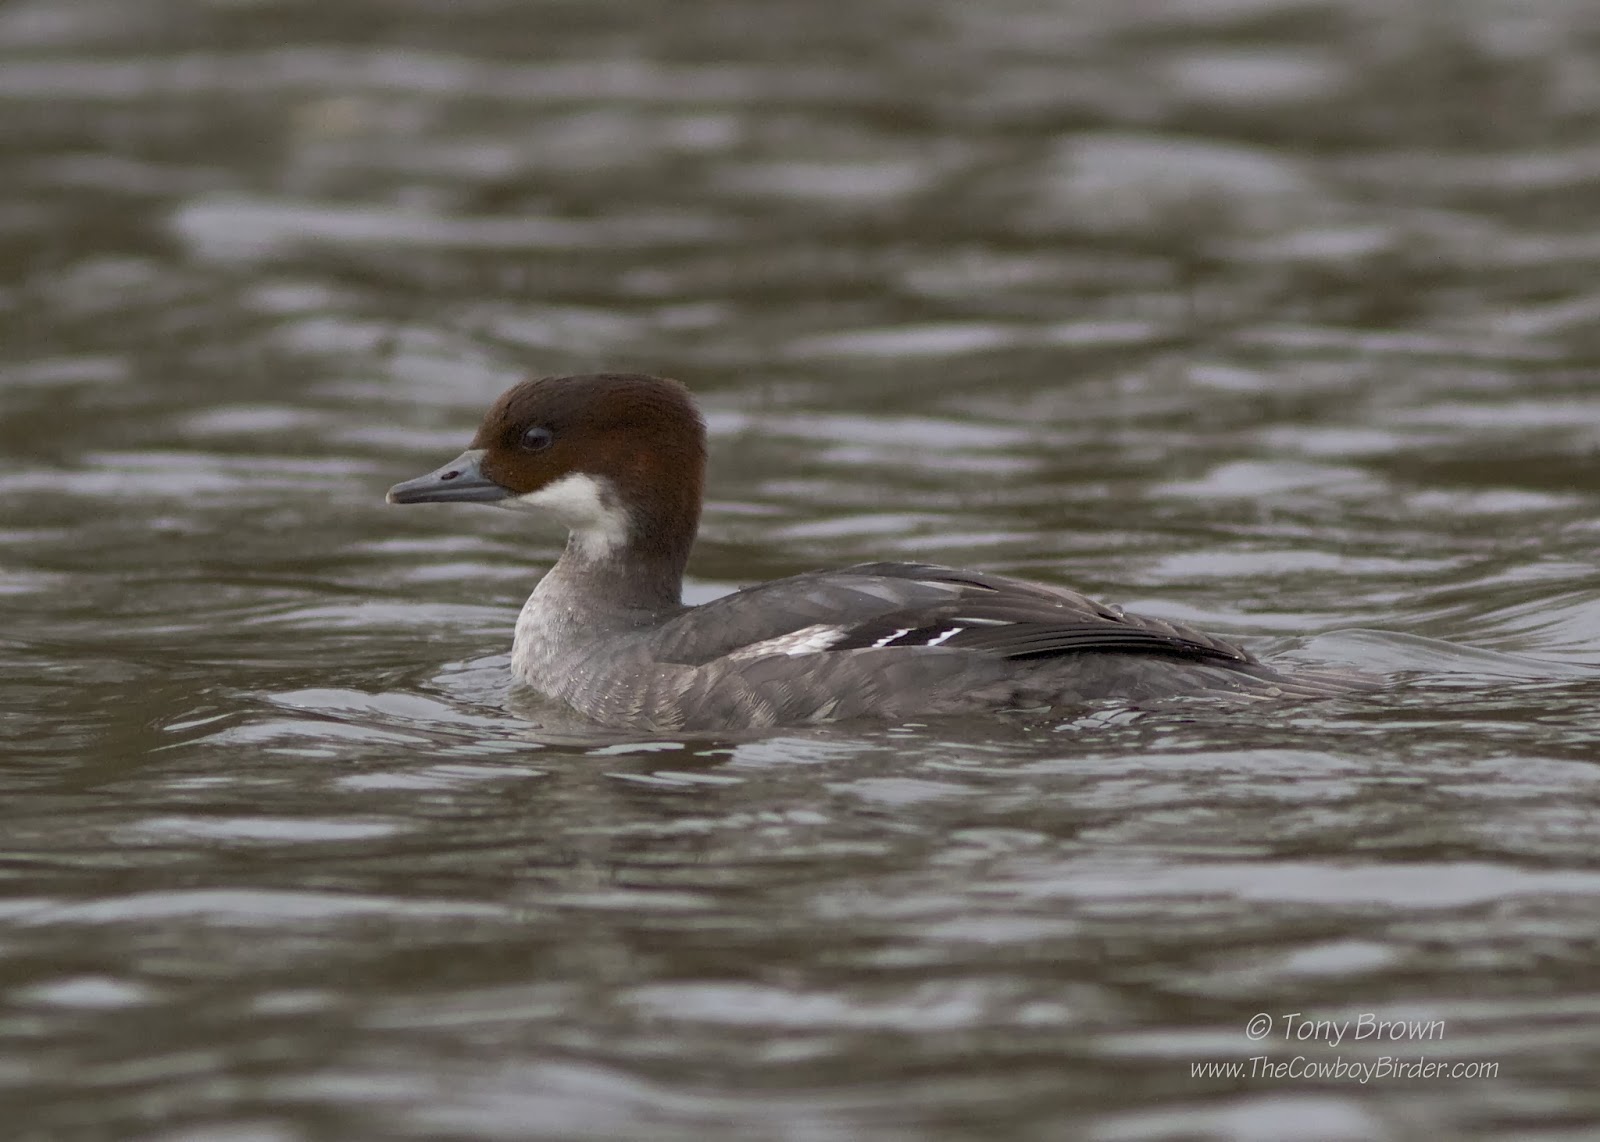 Redhead, Ducks, Epping Forest, Connaught Water, London